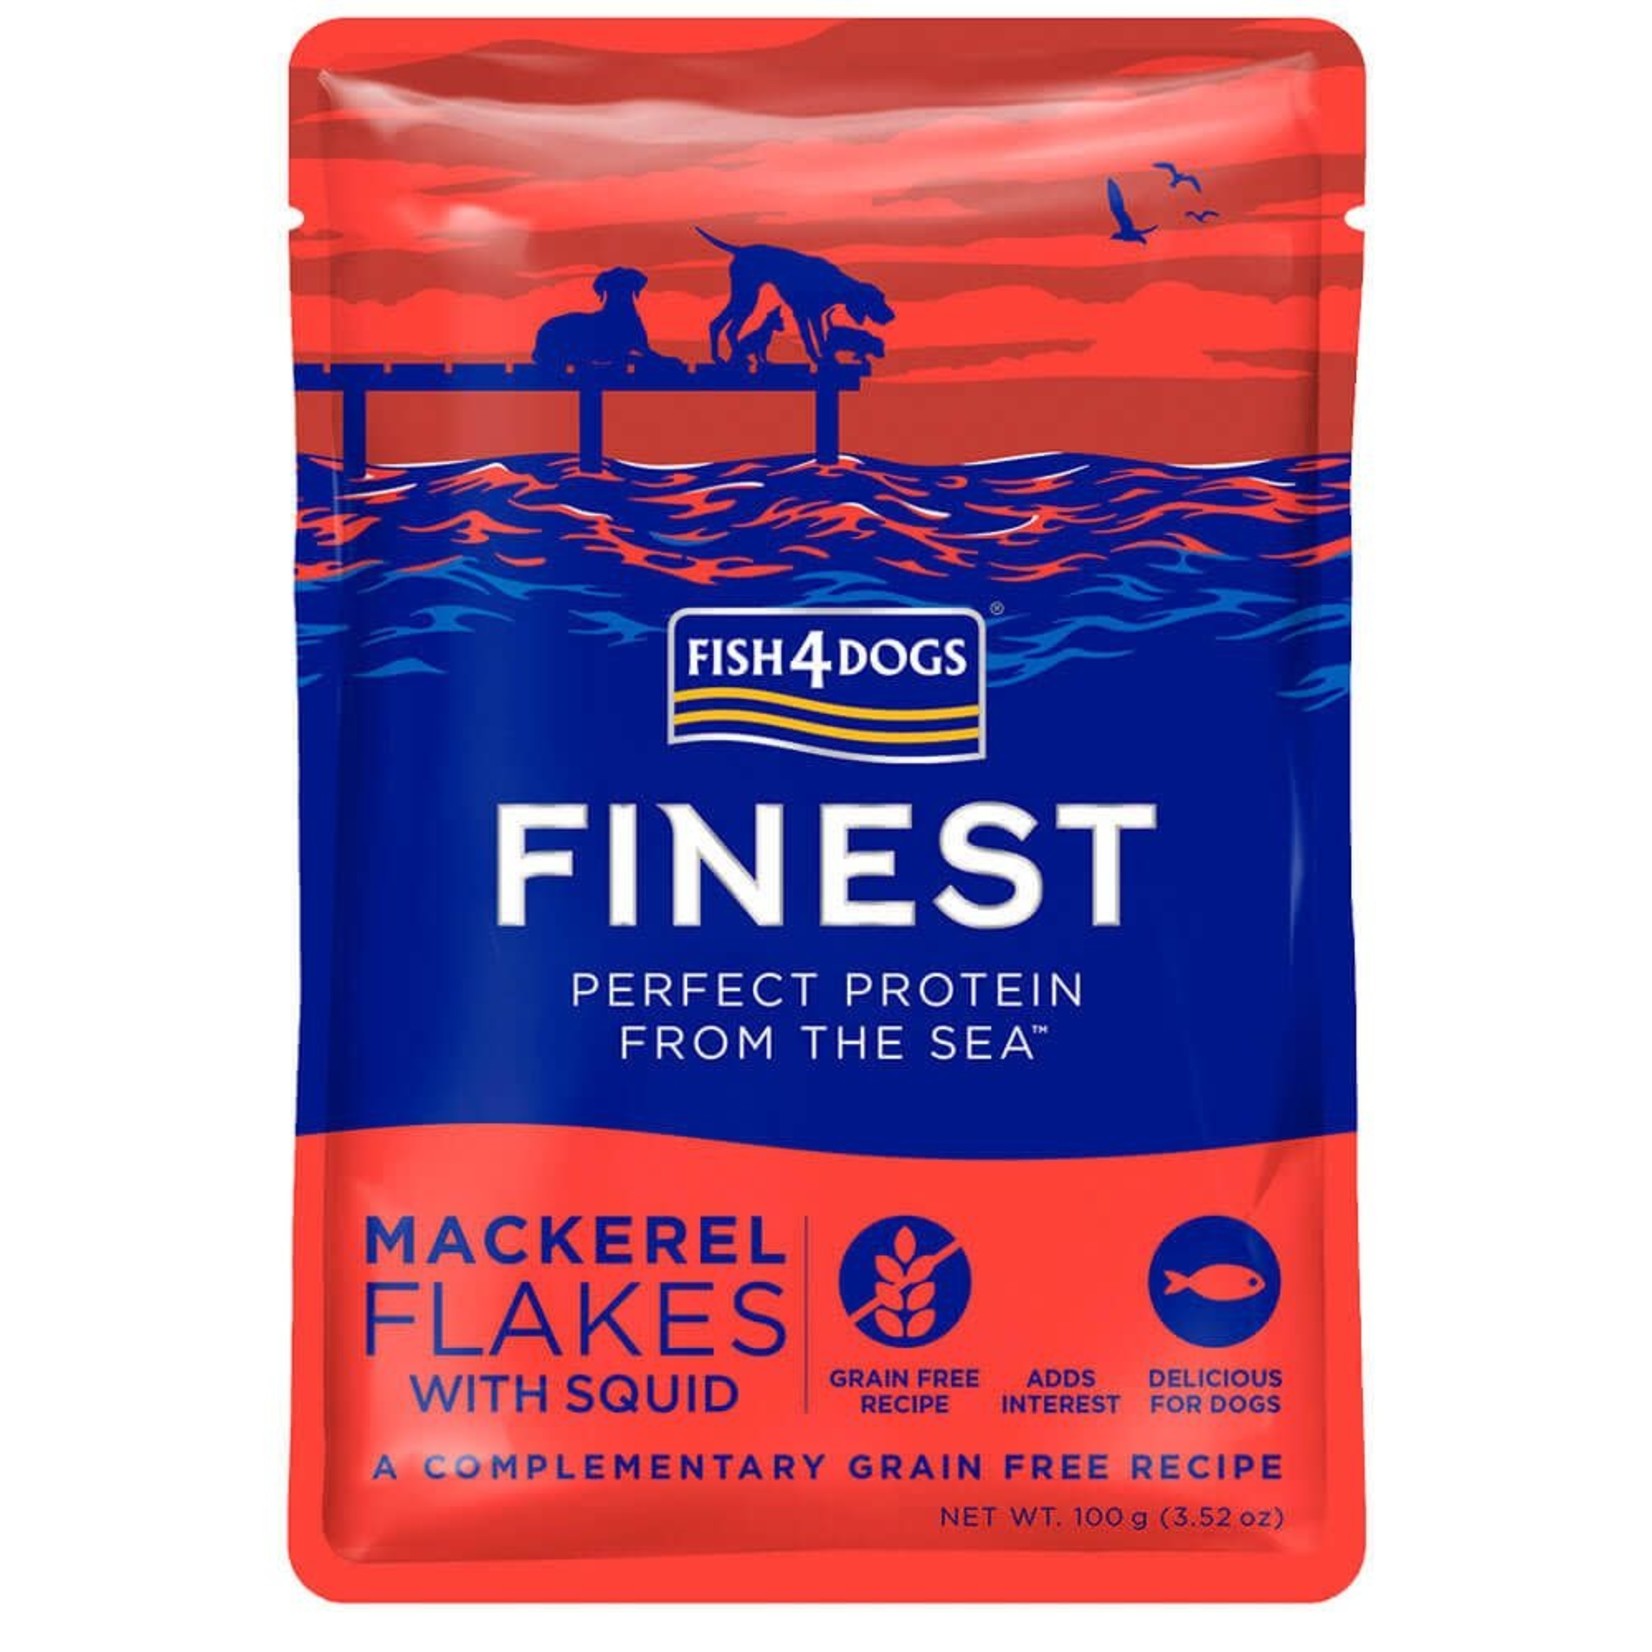 Fish4Dogs Finest Wet Dog Food Mackerel Flakes with Squid, 100g pouch